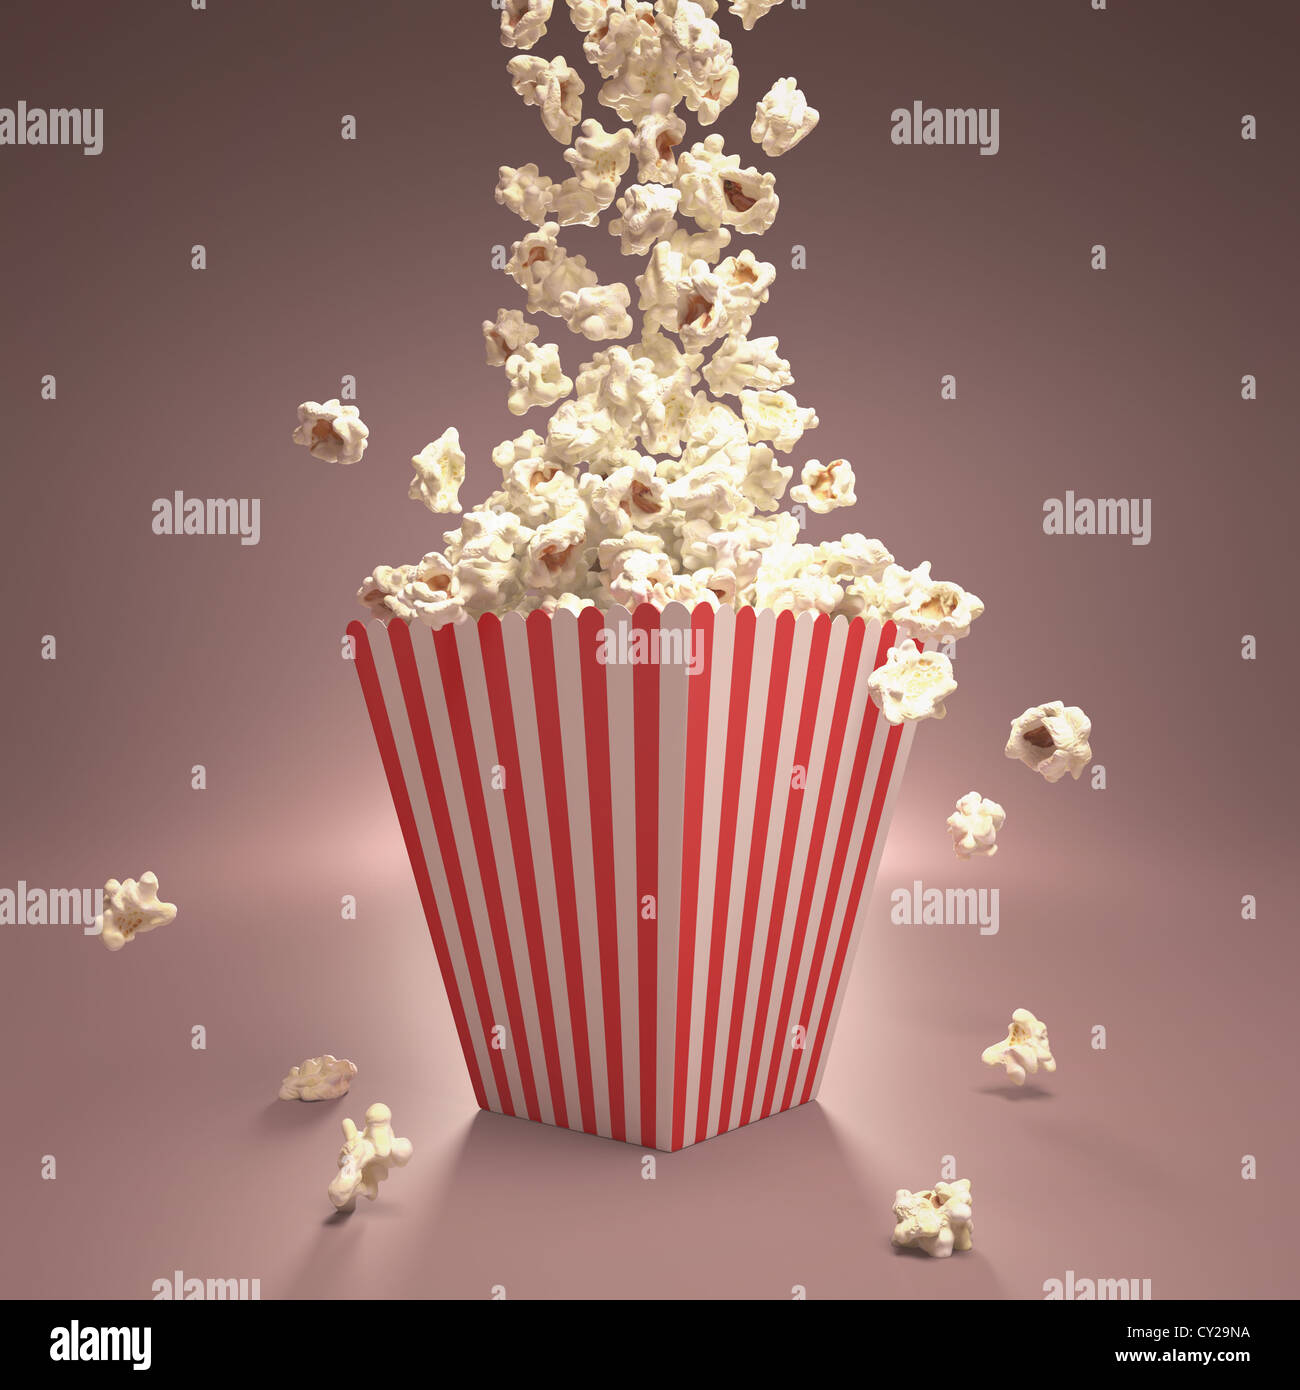 Dropping popcorn in striped classic package. Stock Photo